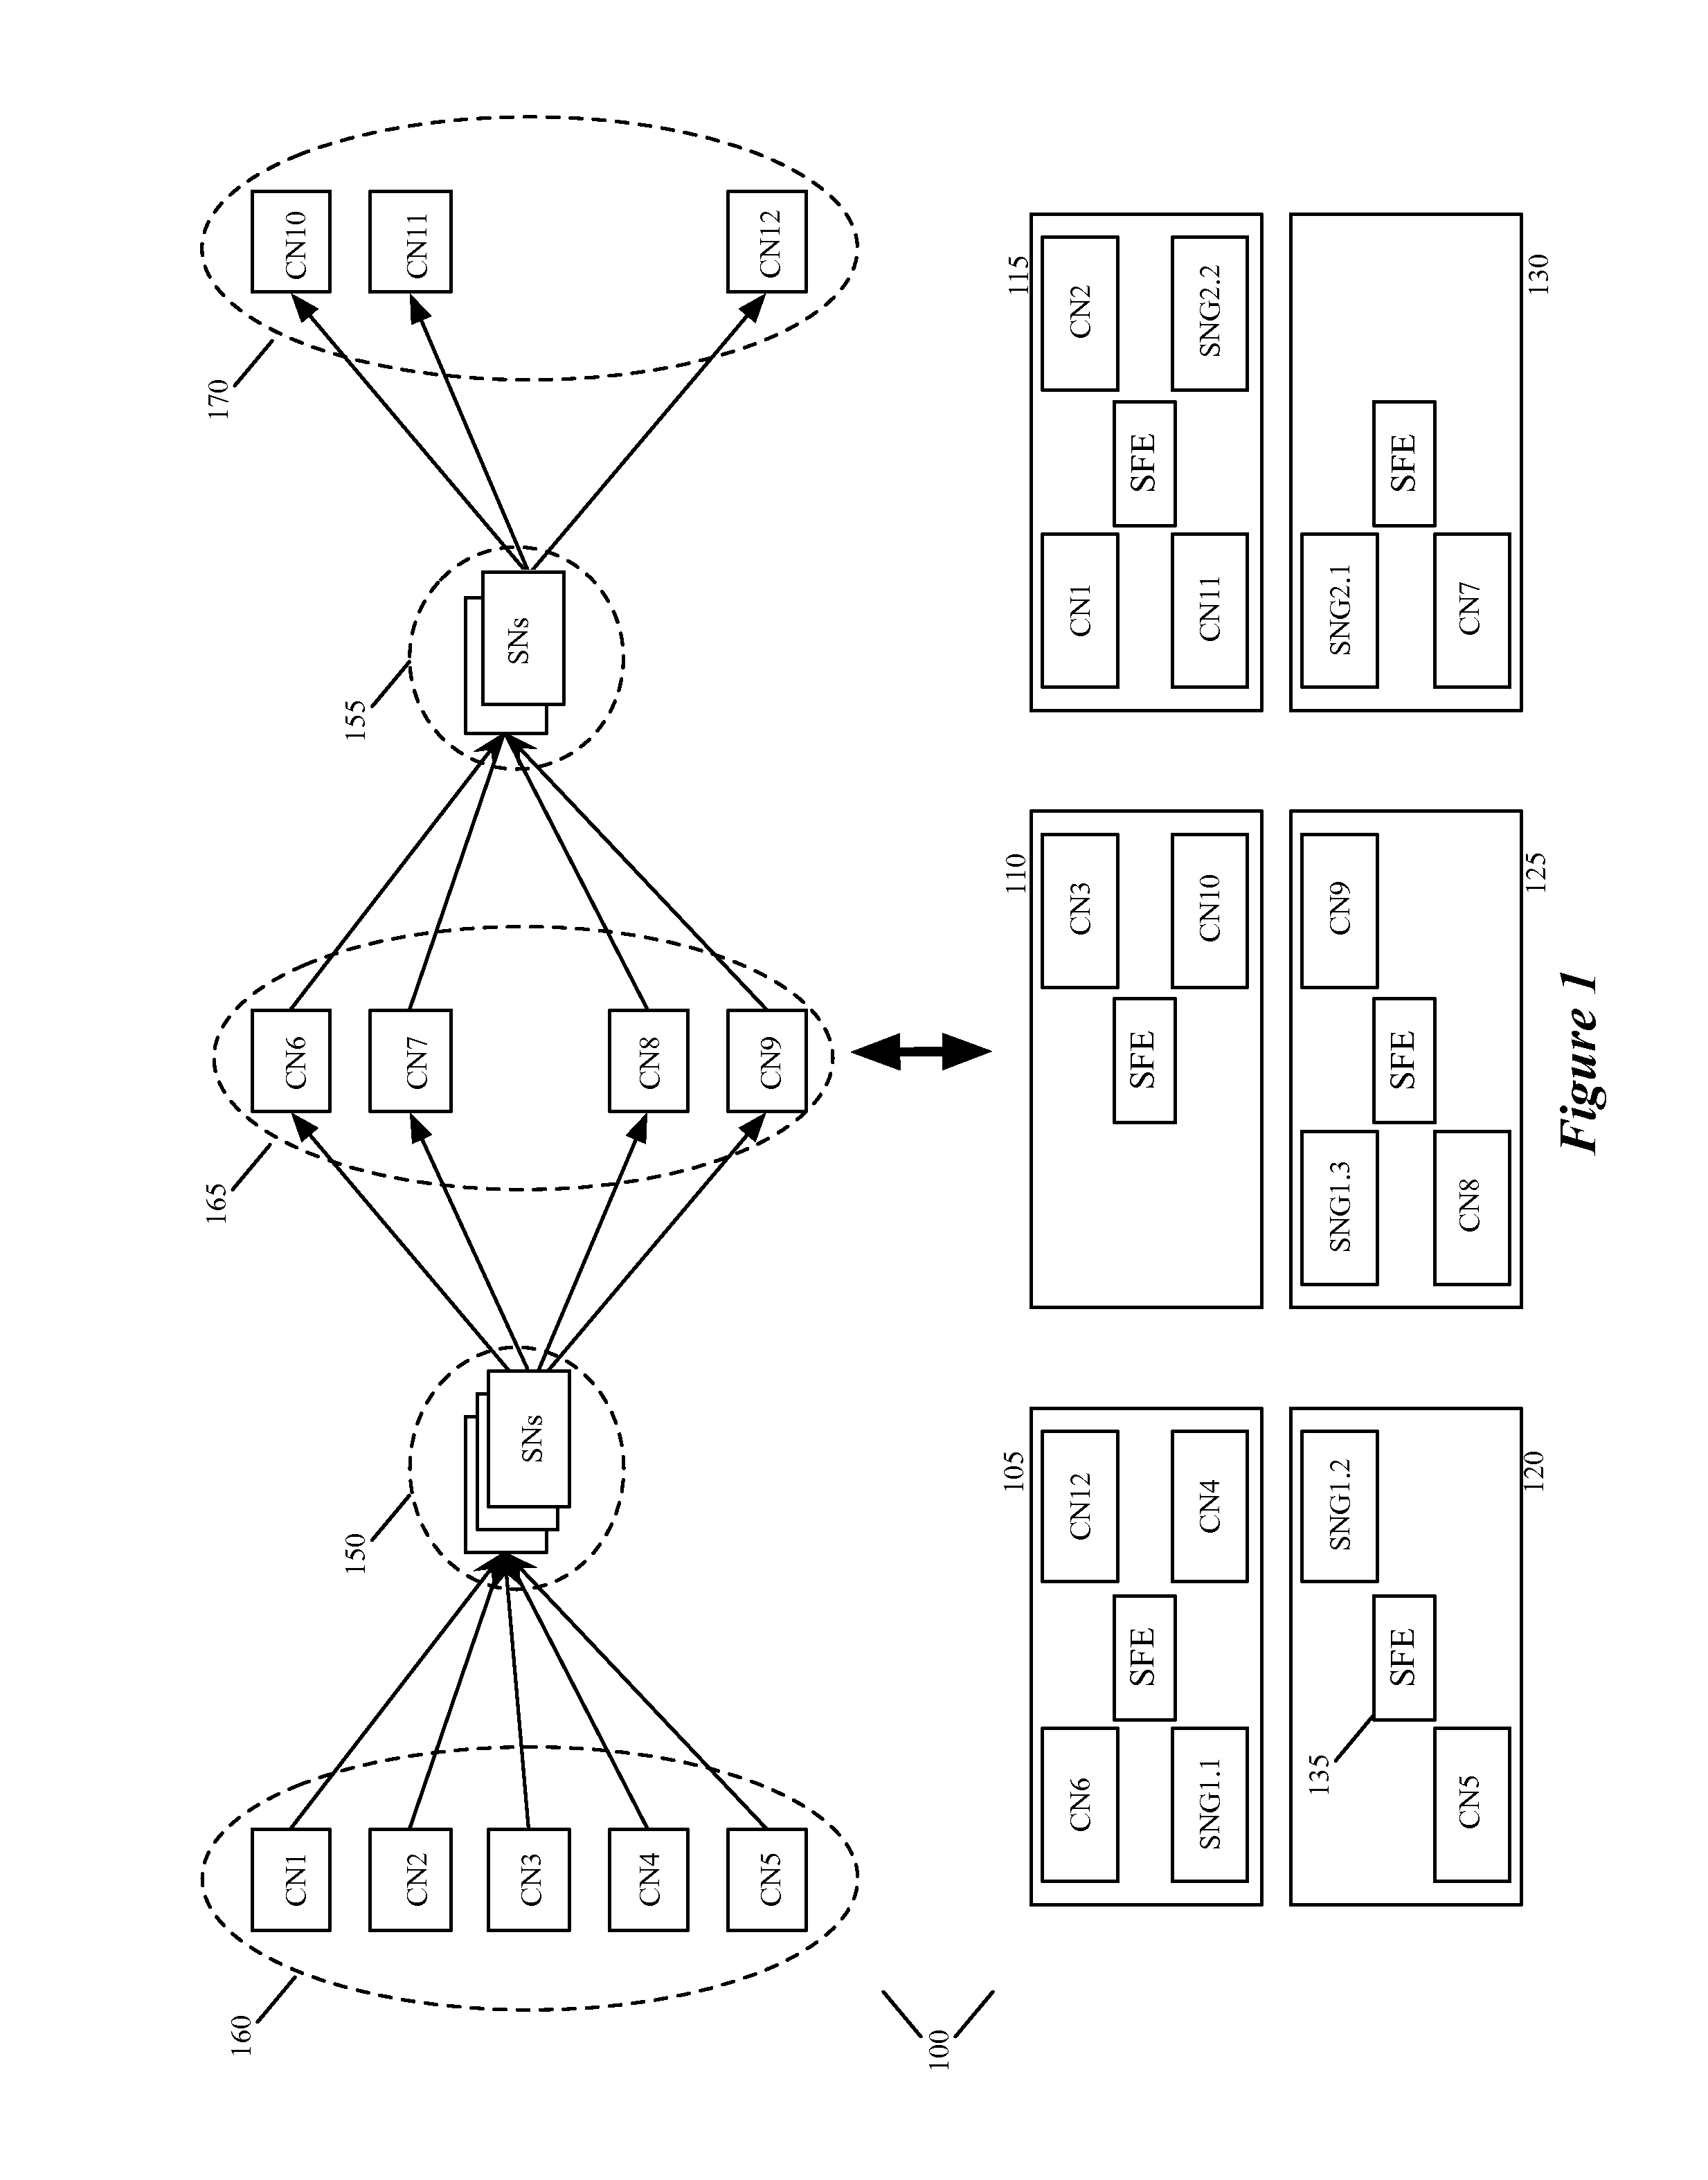 Method and apparatus for distributing load among a plurality of service nodes